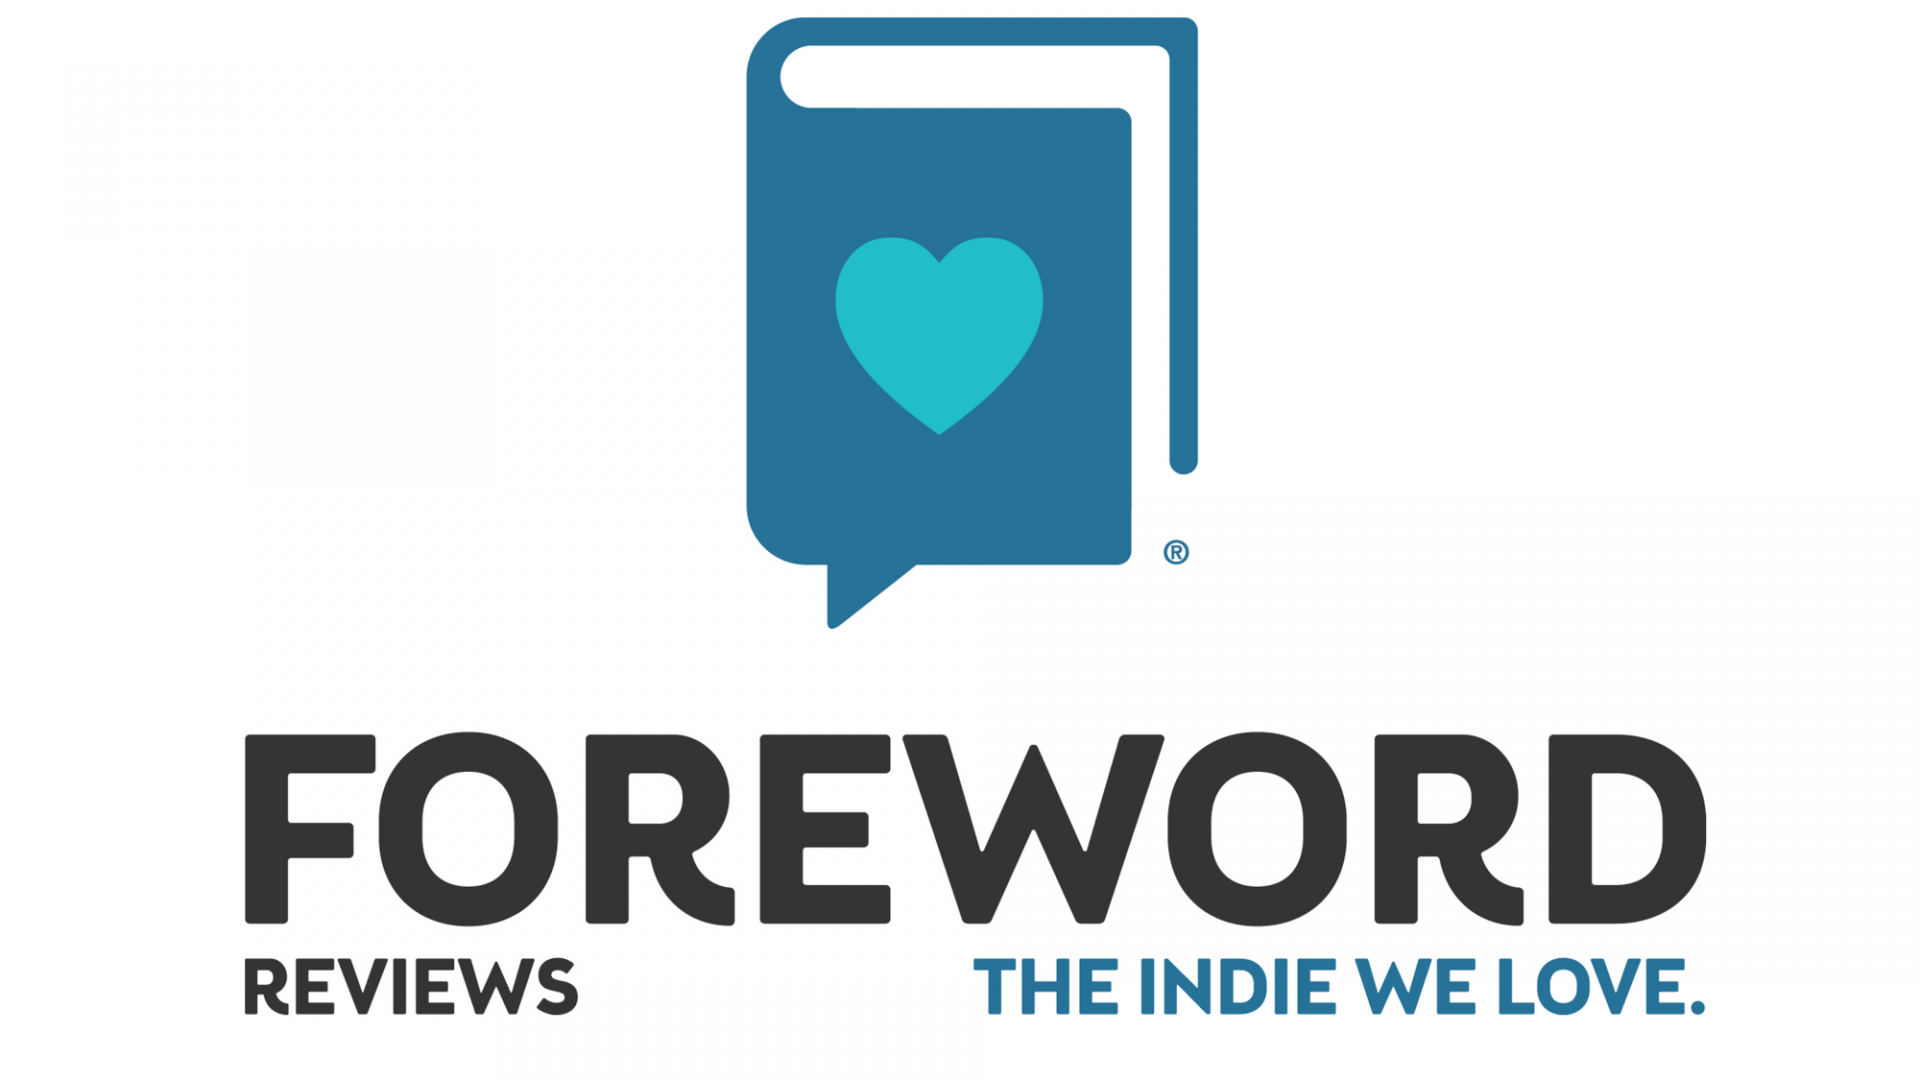 The Foreword Review